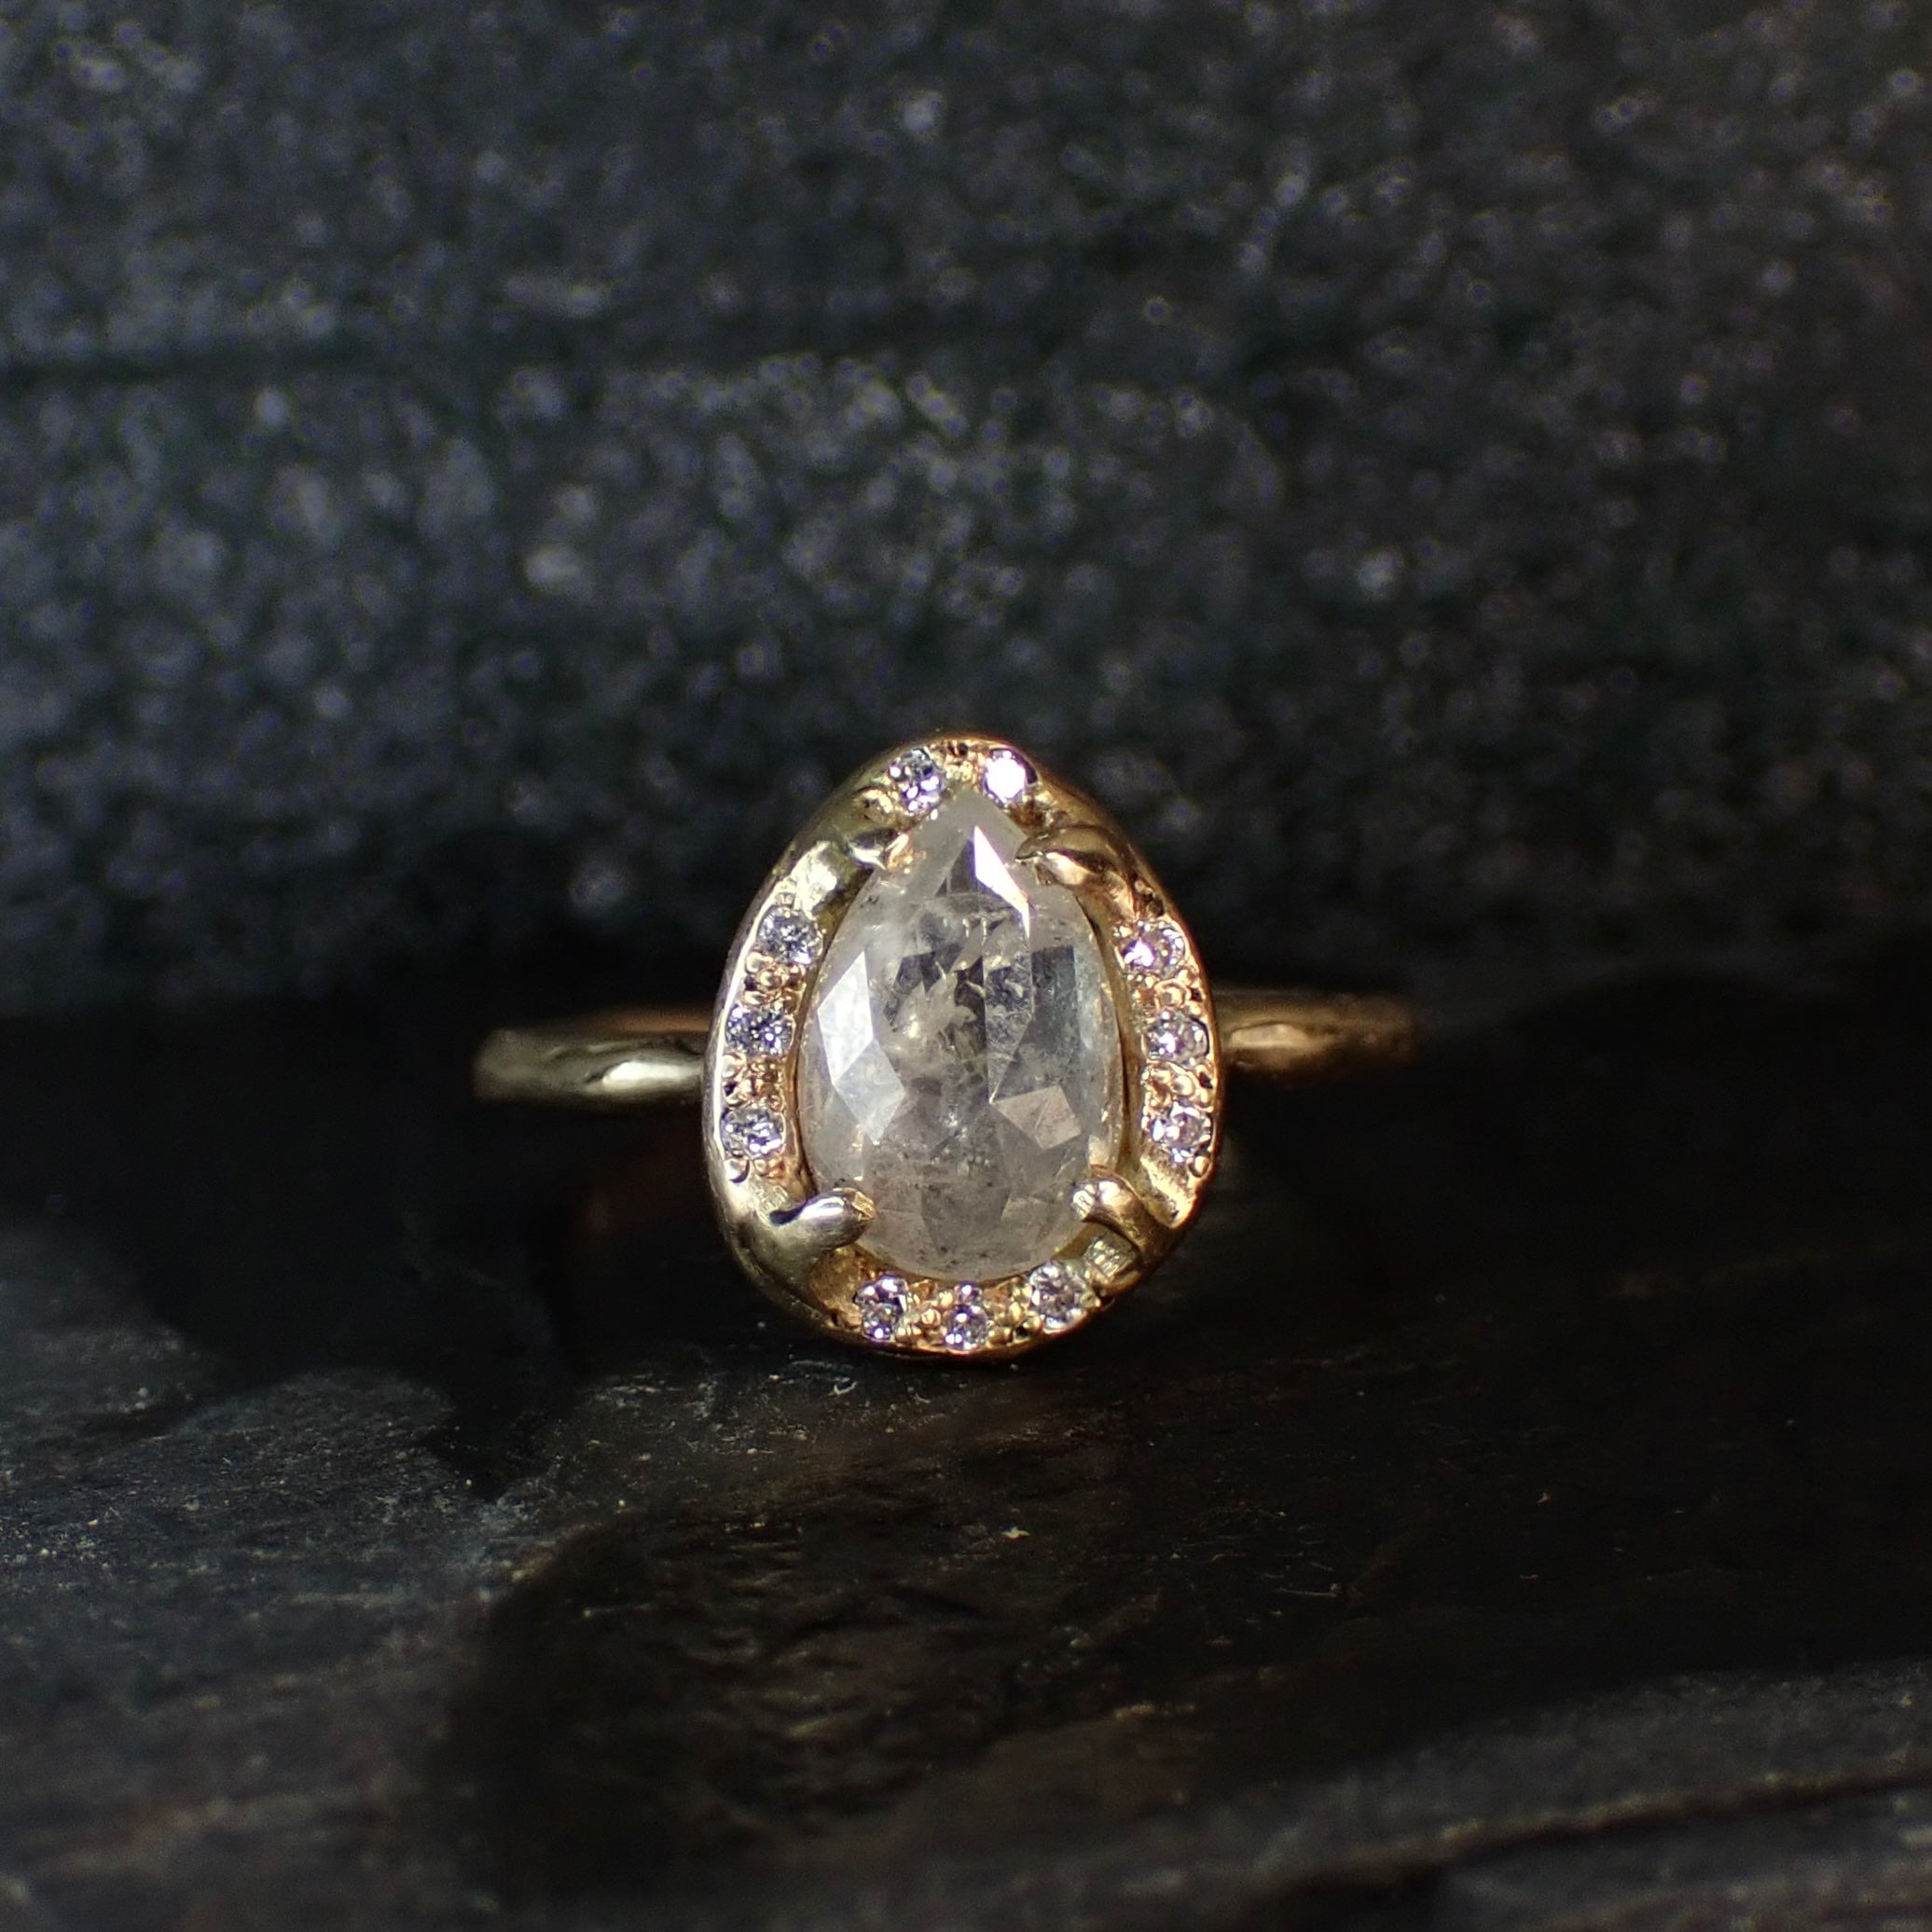 Icy White Salt and Pepper Pear Diamond Ring, in a Molten Diamond Halo - mossNstone